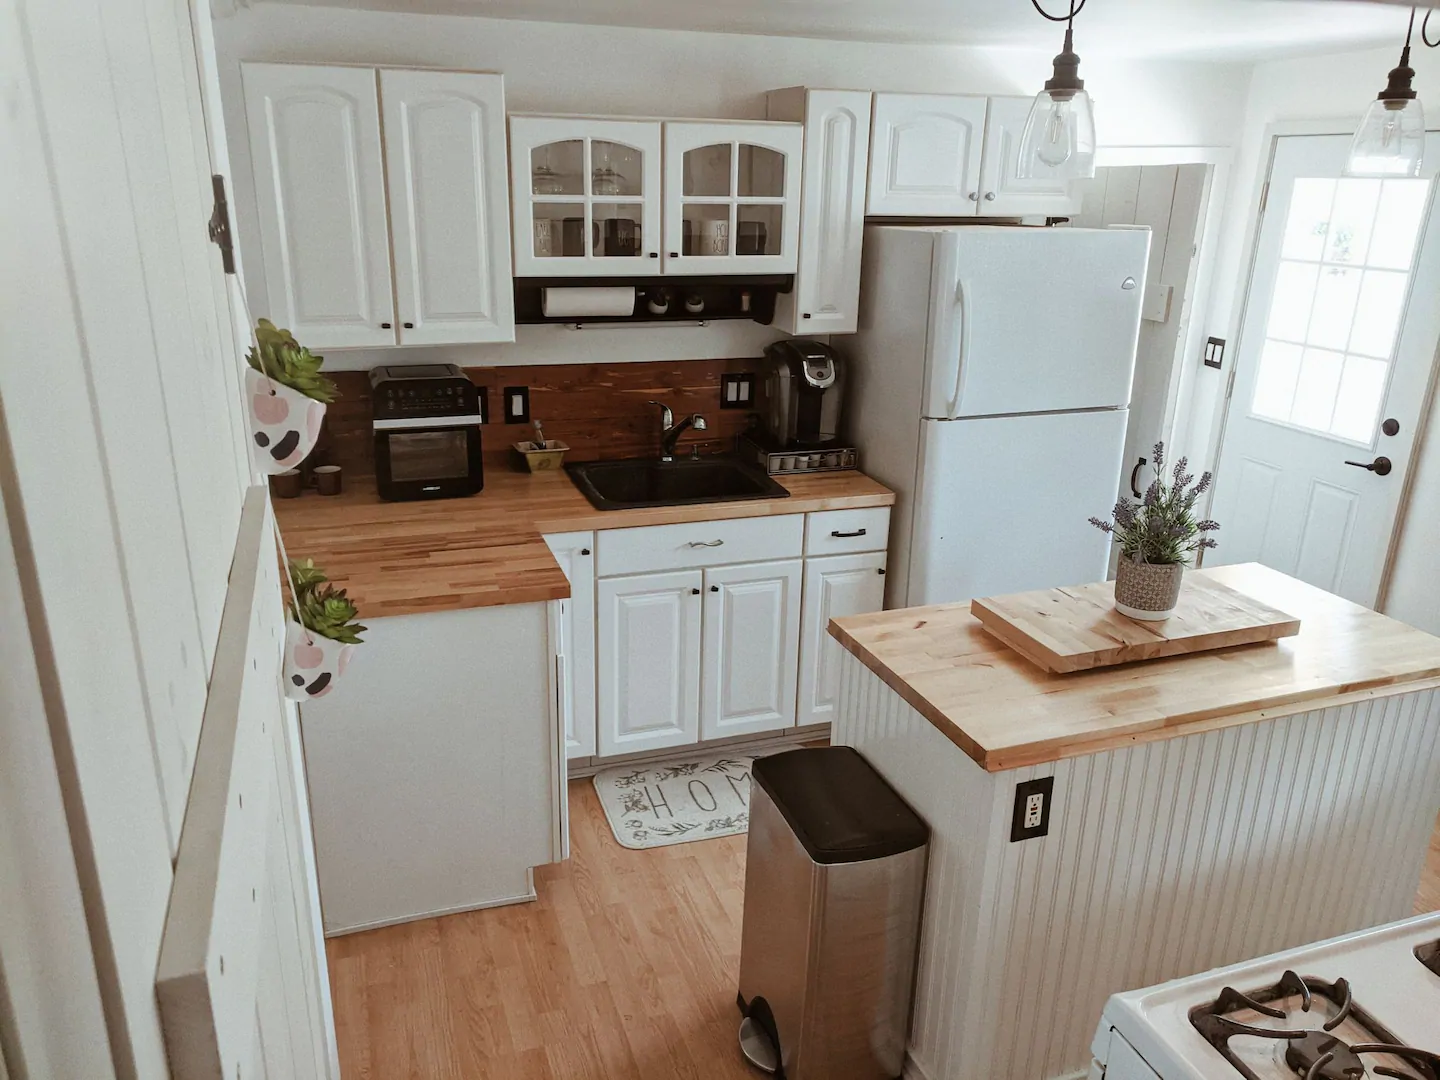 Interior of a kitchen with white cabinets and warm wood accents.